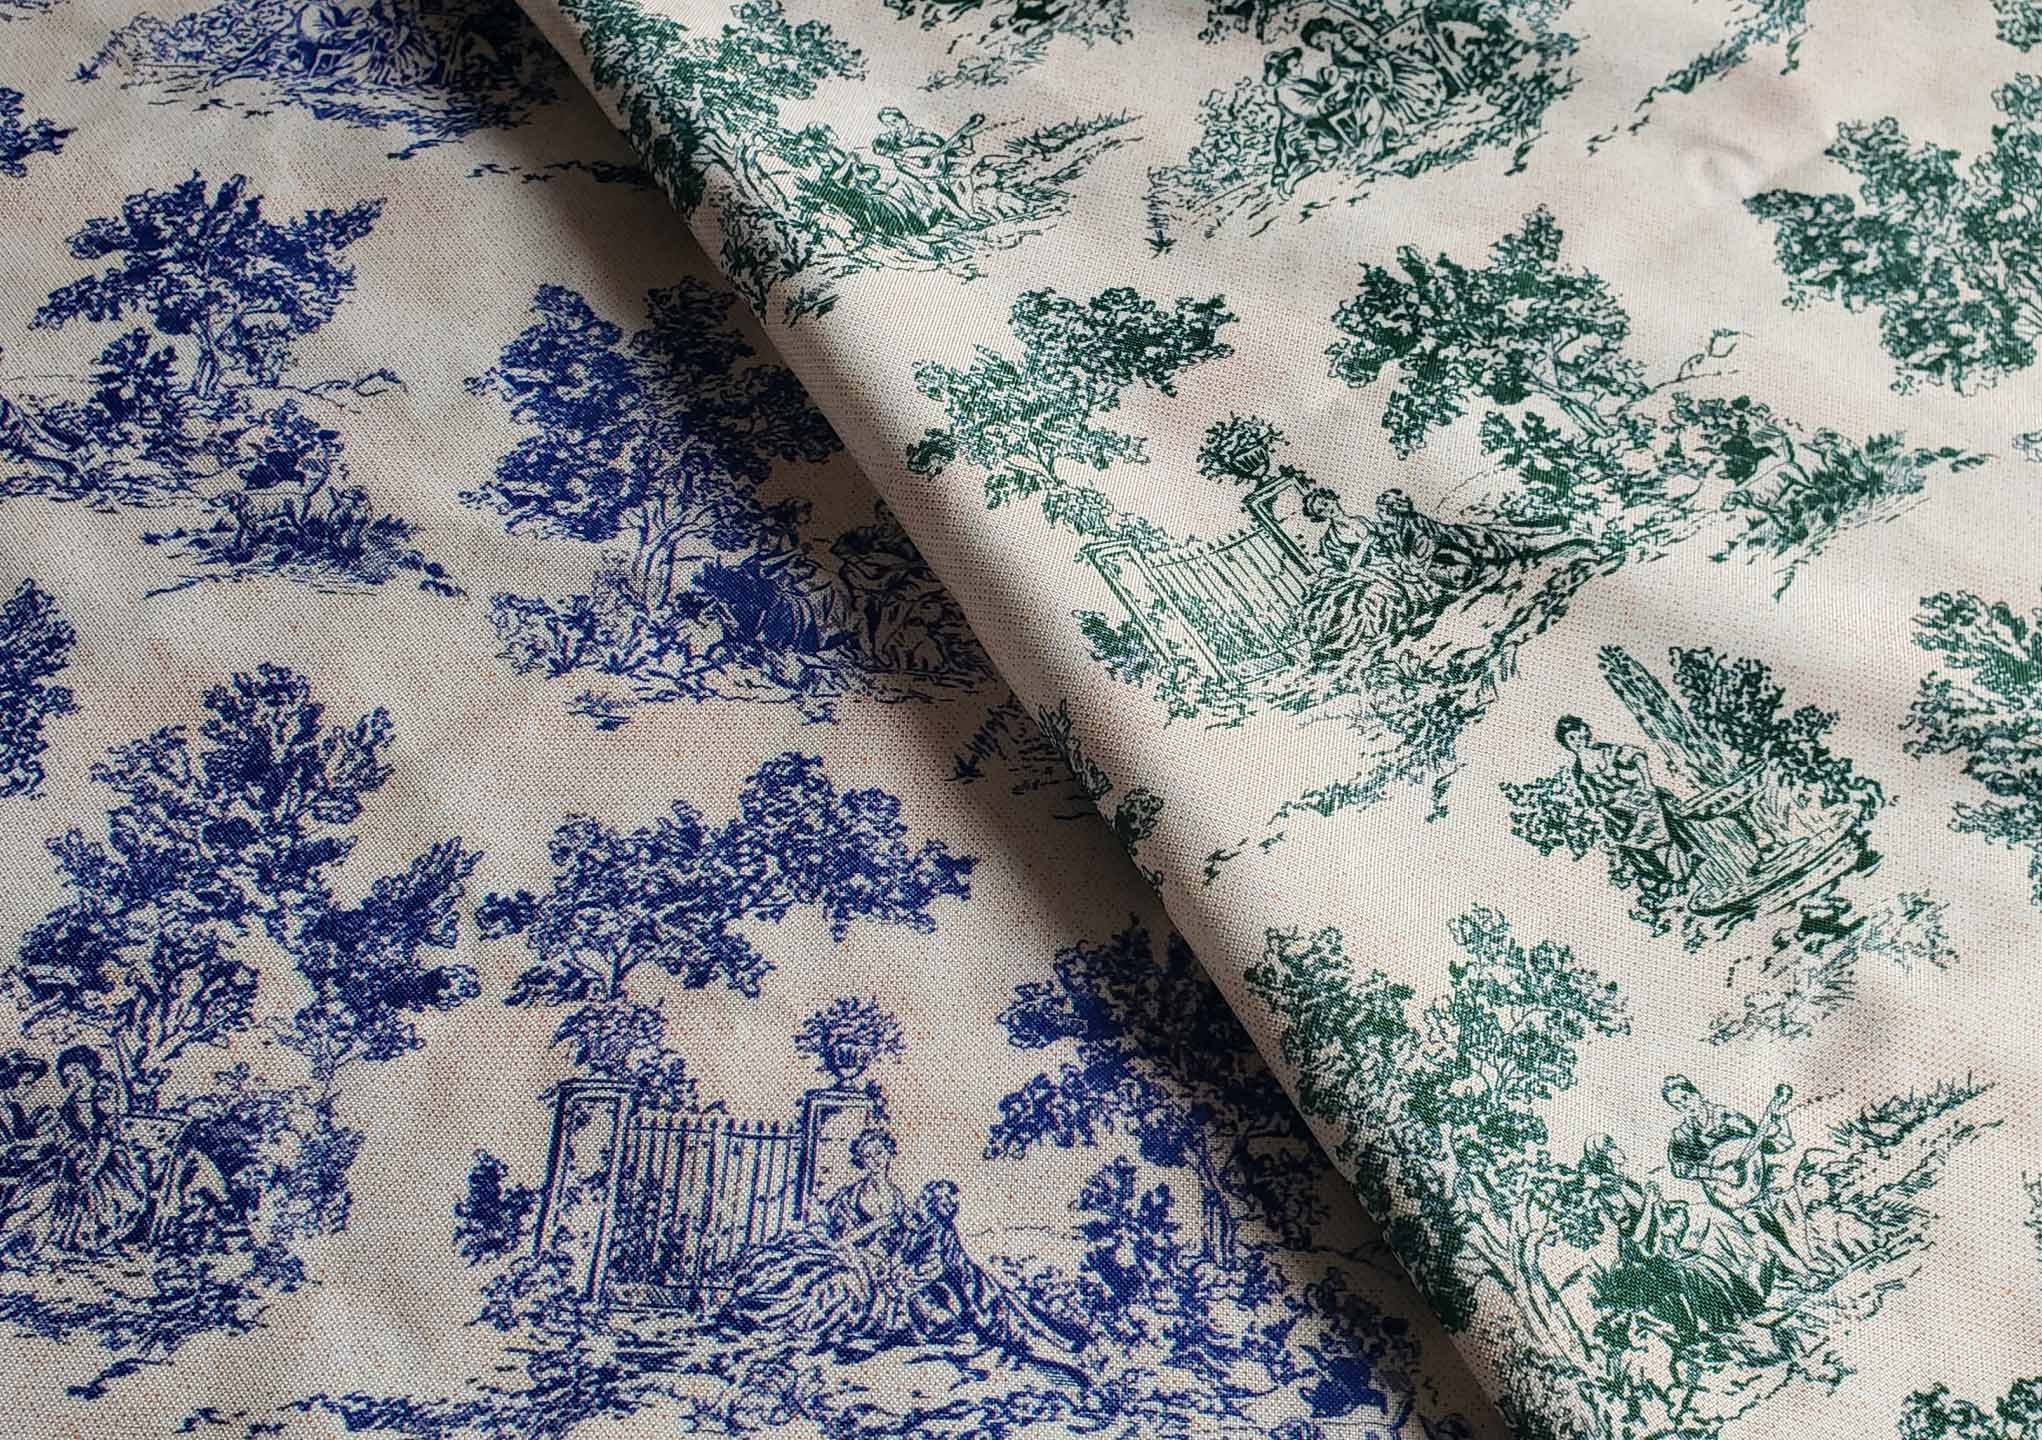 Toile Fabric, French Upholstery Fabric, Country Fabric, Blue White  Farmhouse Cottage Cotton Canvas Drapery Curtain Home Decor Fabric by Yard 